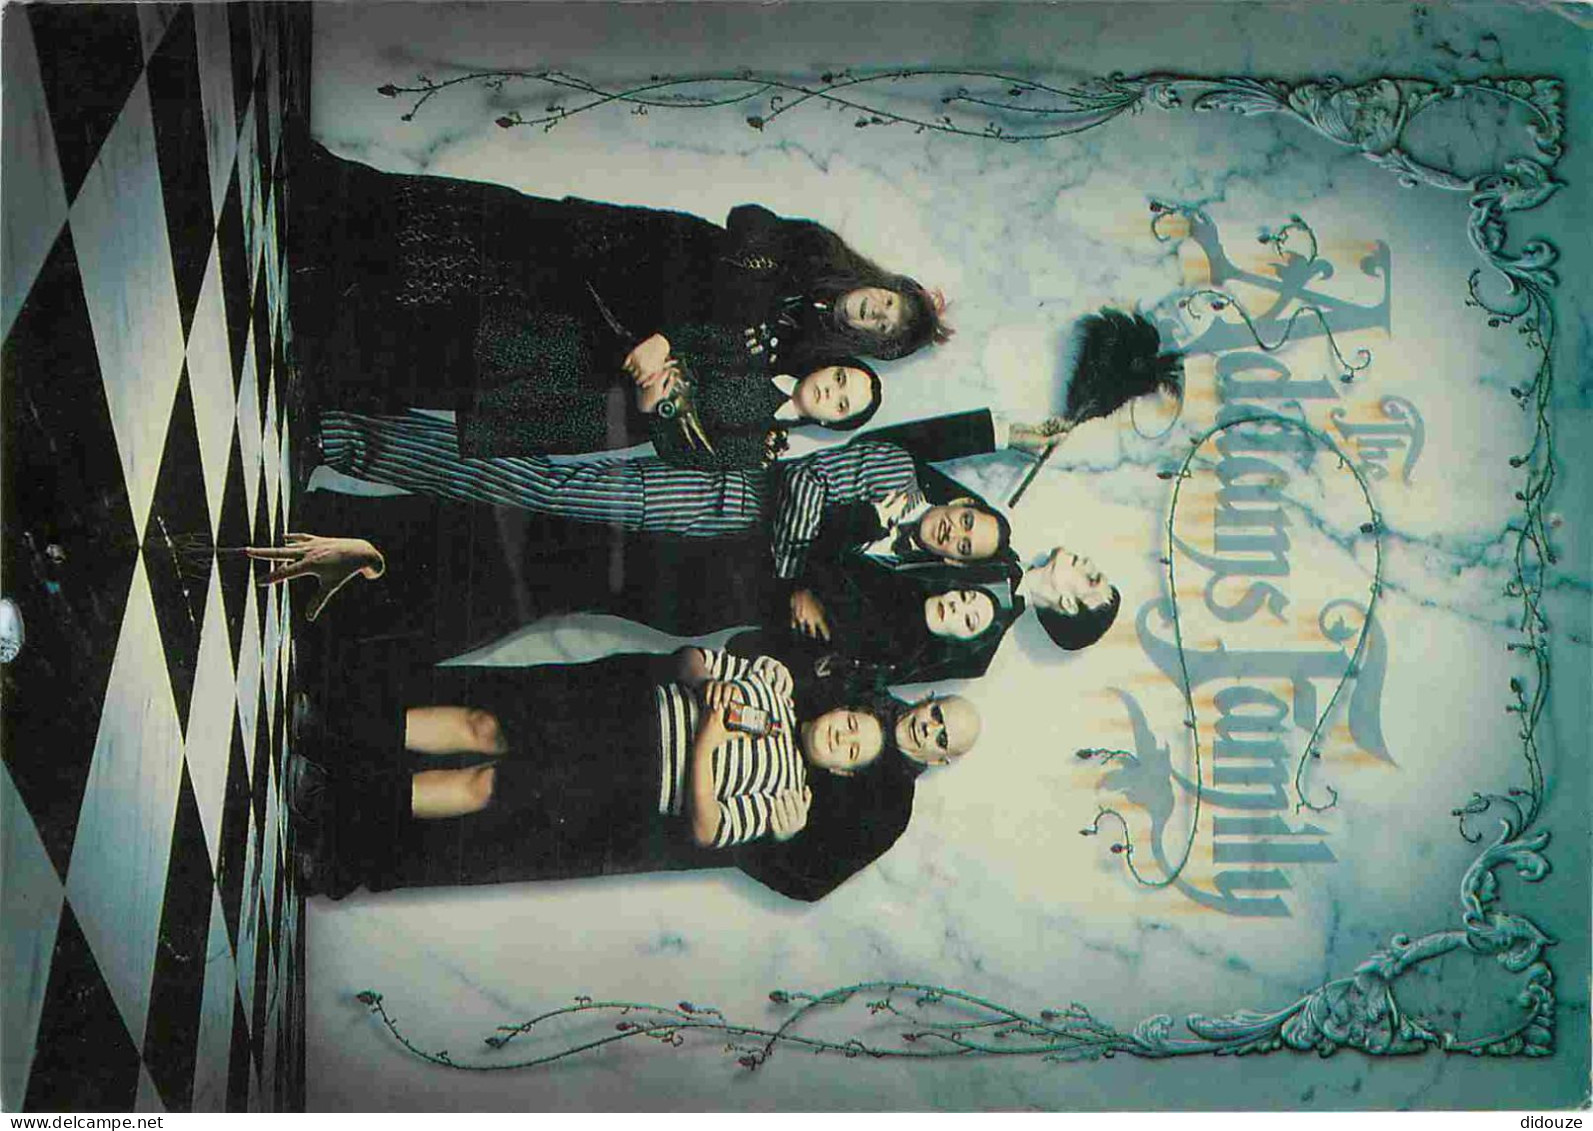 Cinema - Affiche De Film - The Addams Family - La Famille Addams - CPM - Voir Scans Recto-Verso - Posters On Cards